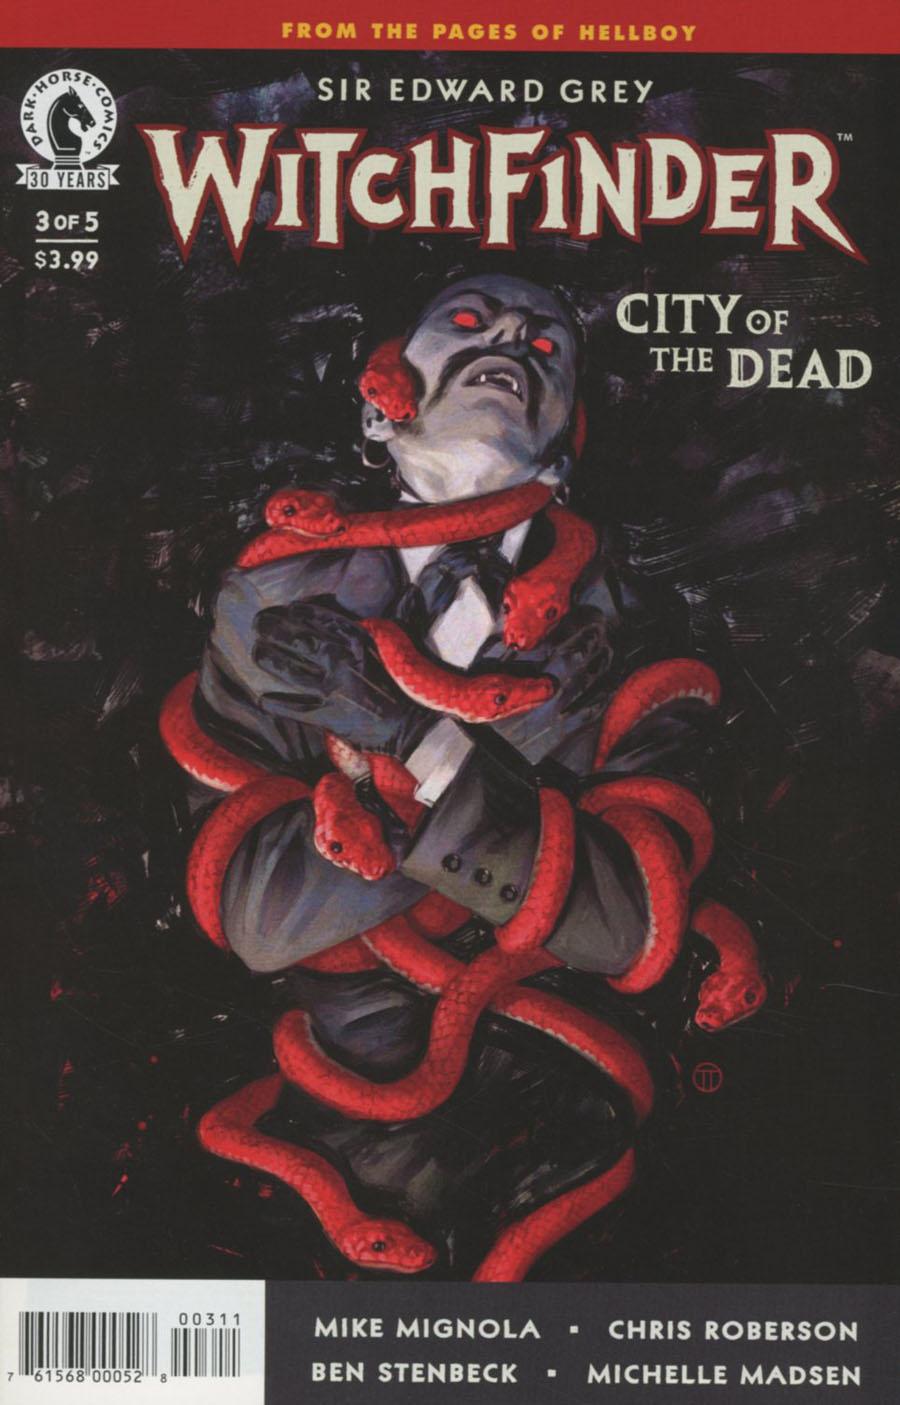 Witchfinder City Of The Dead Vol. 1 #3